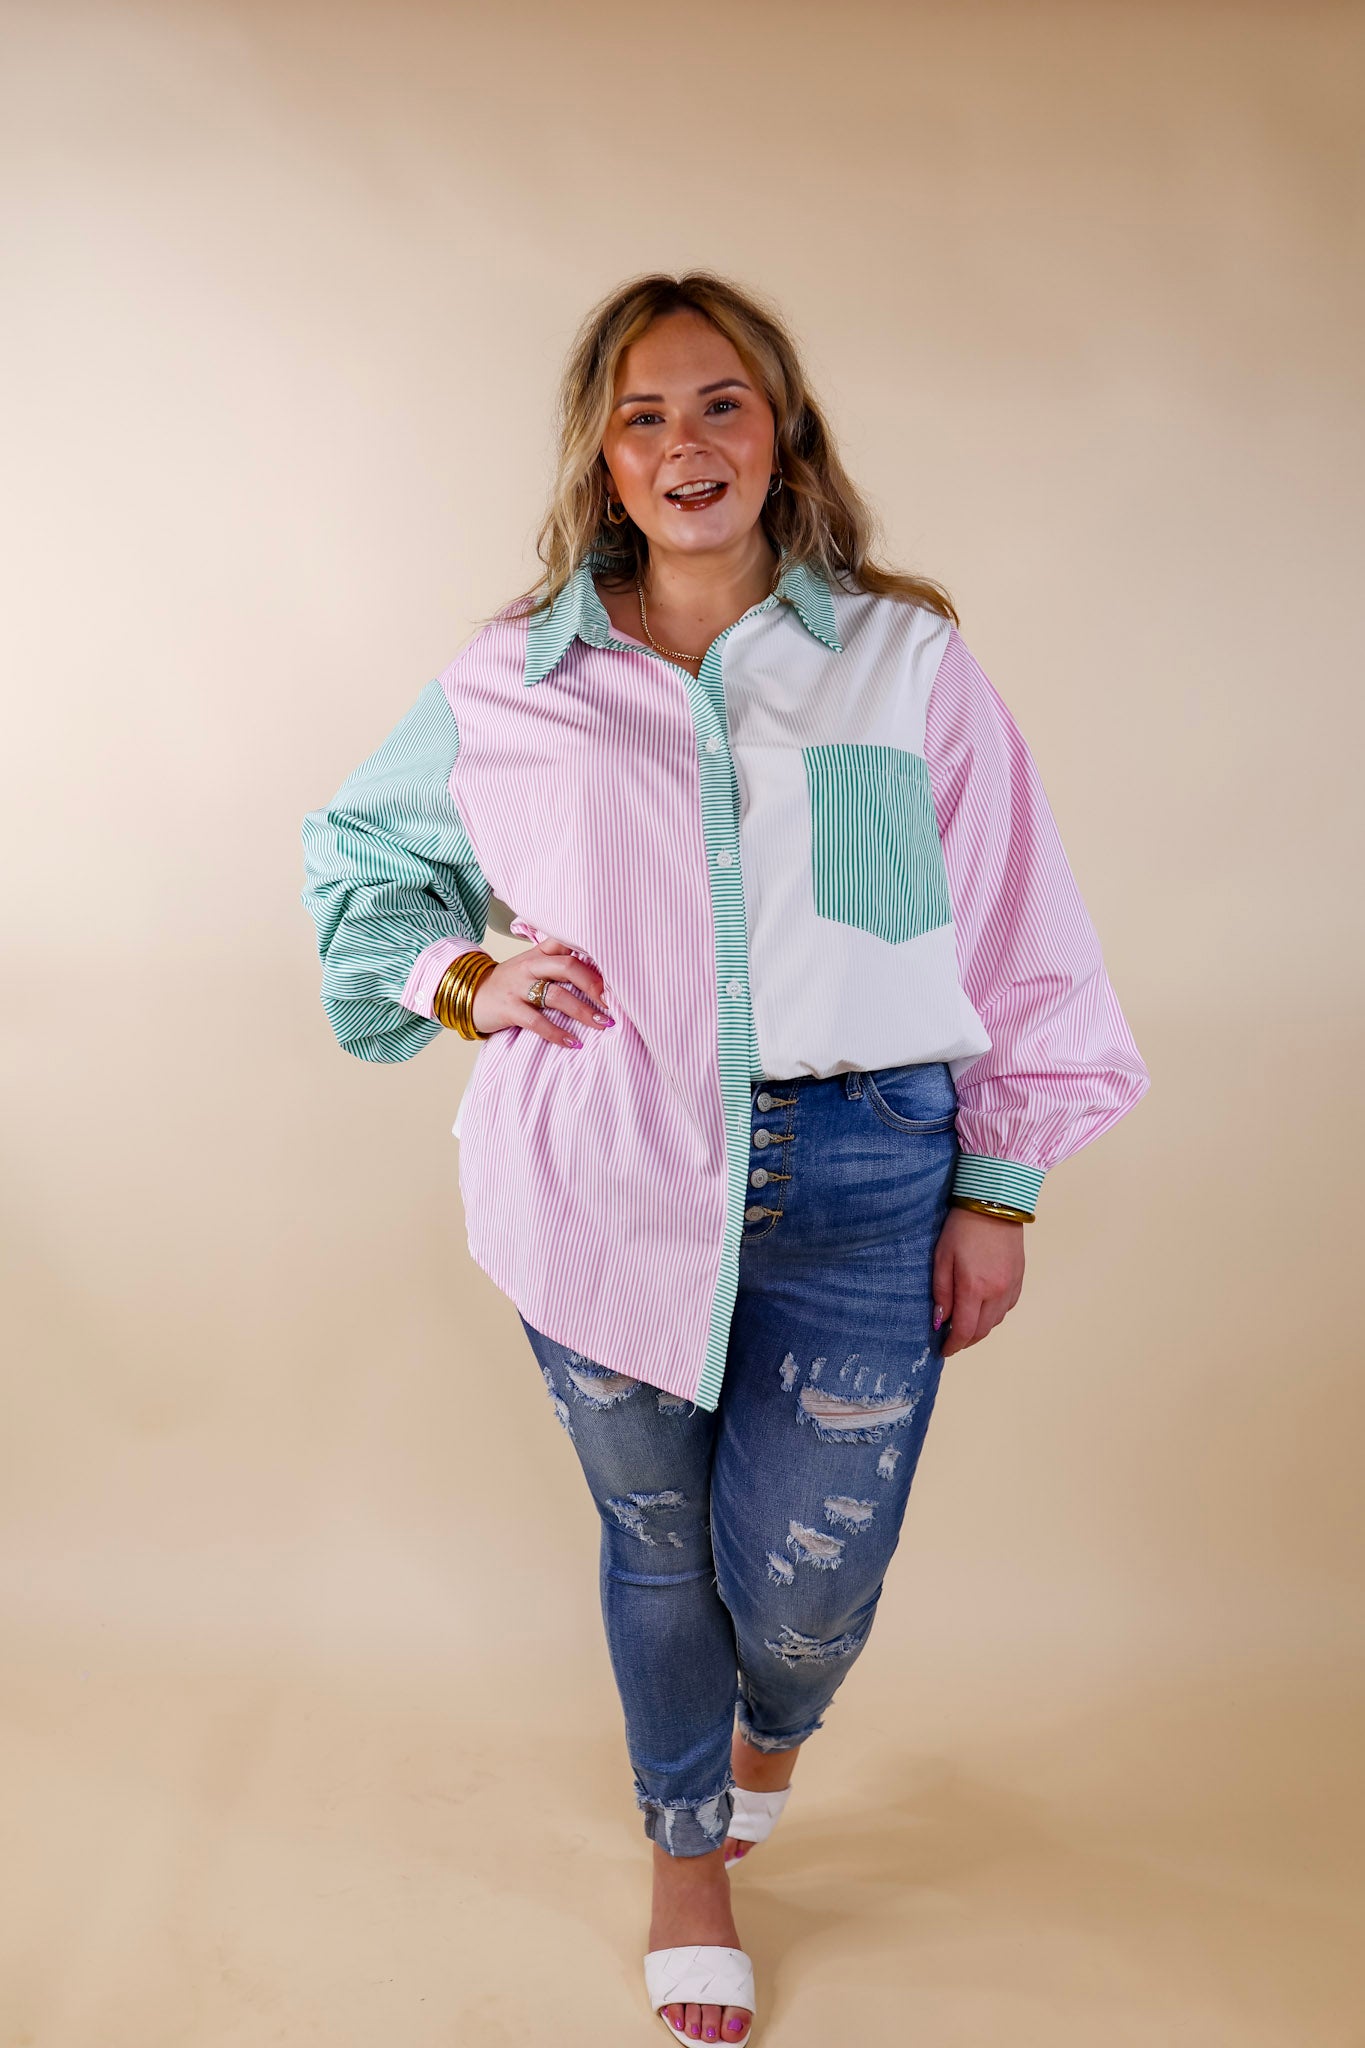 Picture This Pin Stripe Color Block Button Up Top in Pink and Green - Giddy Up Glamour Boutique